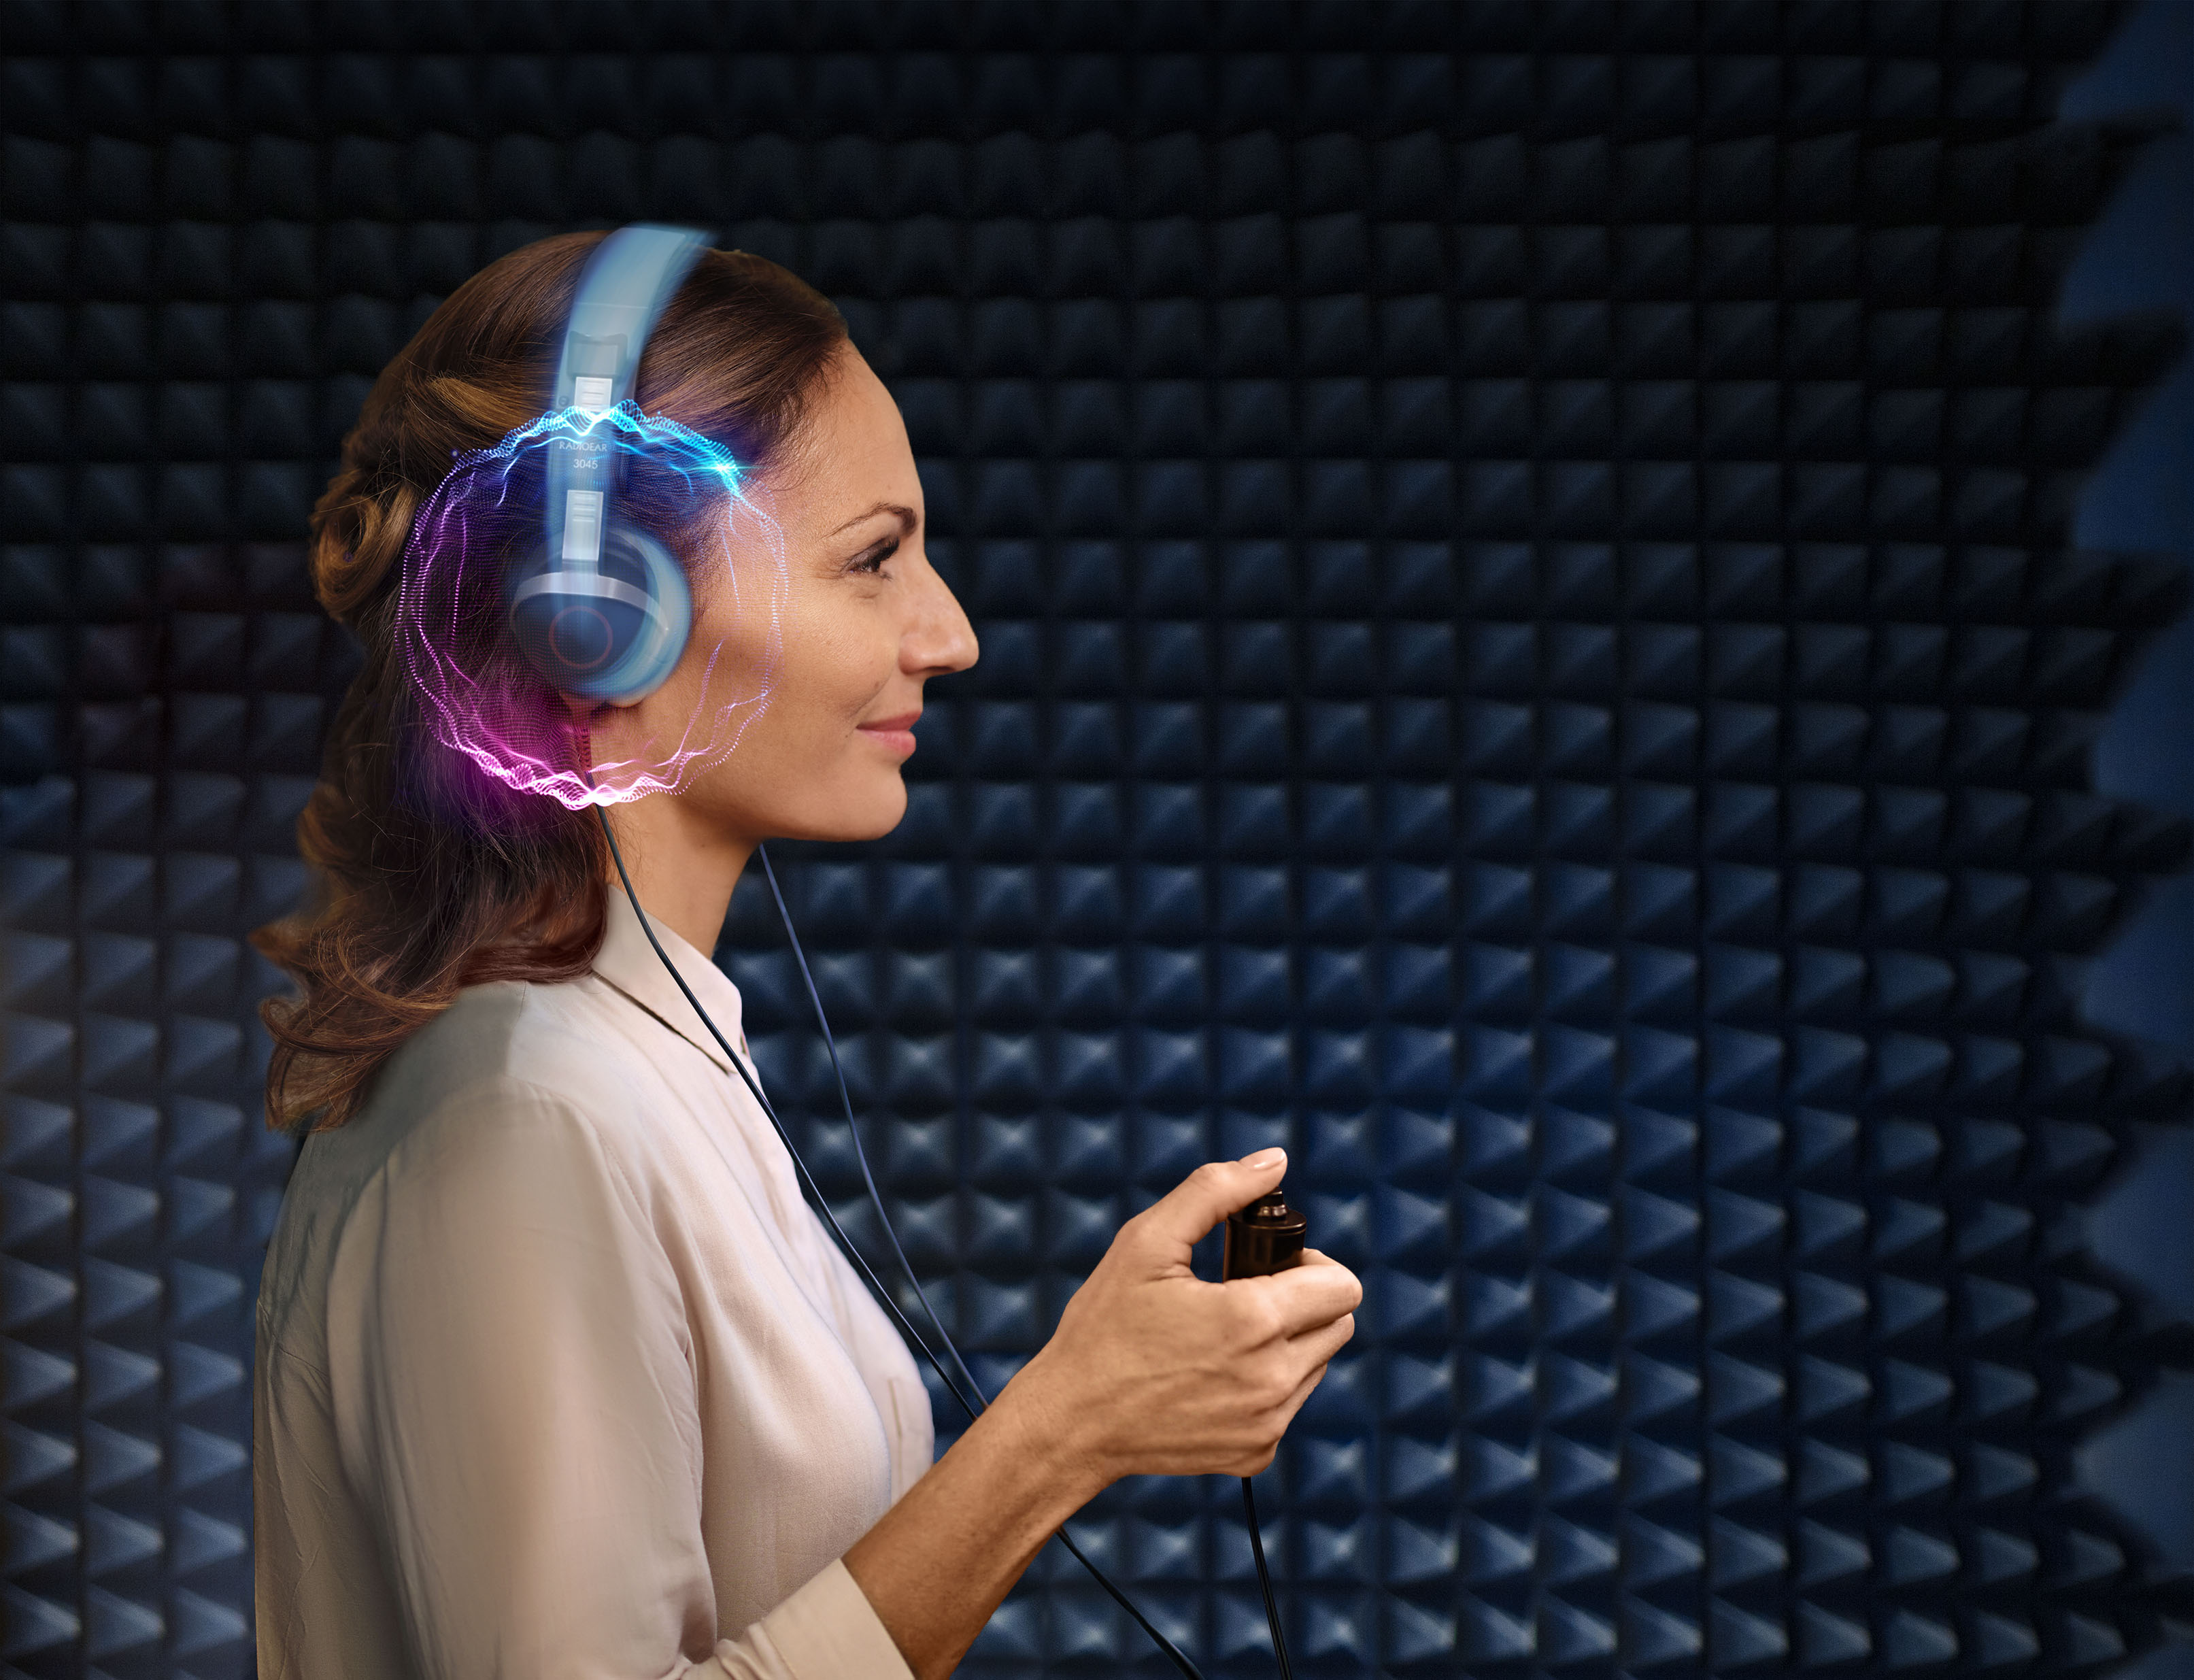 oticon_act_key_visual_woman_in-anechoic_chamber_as_453913390_as_190510297